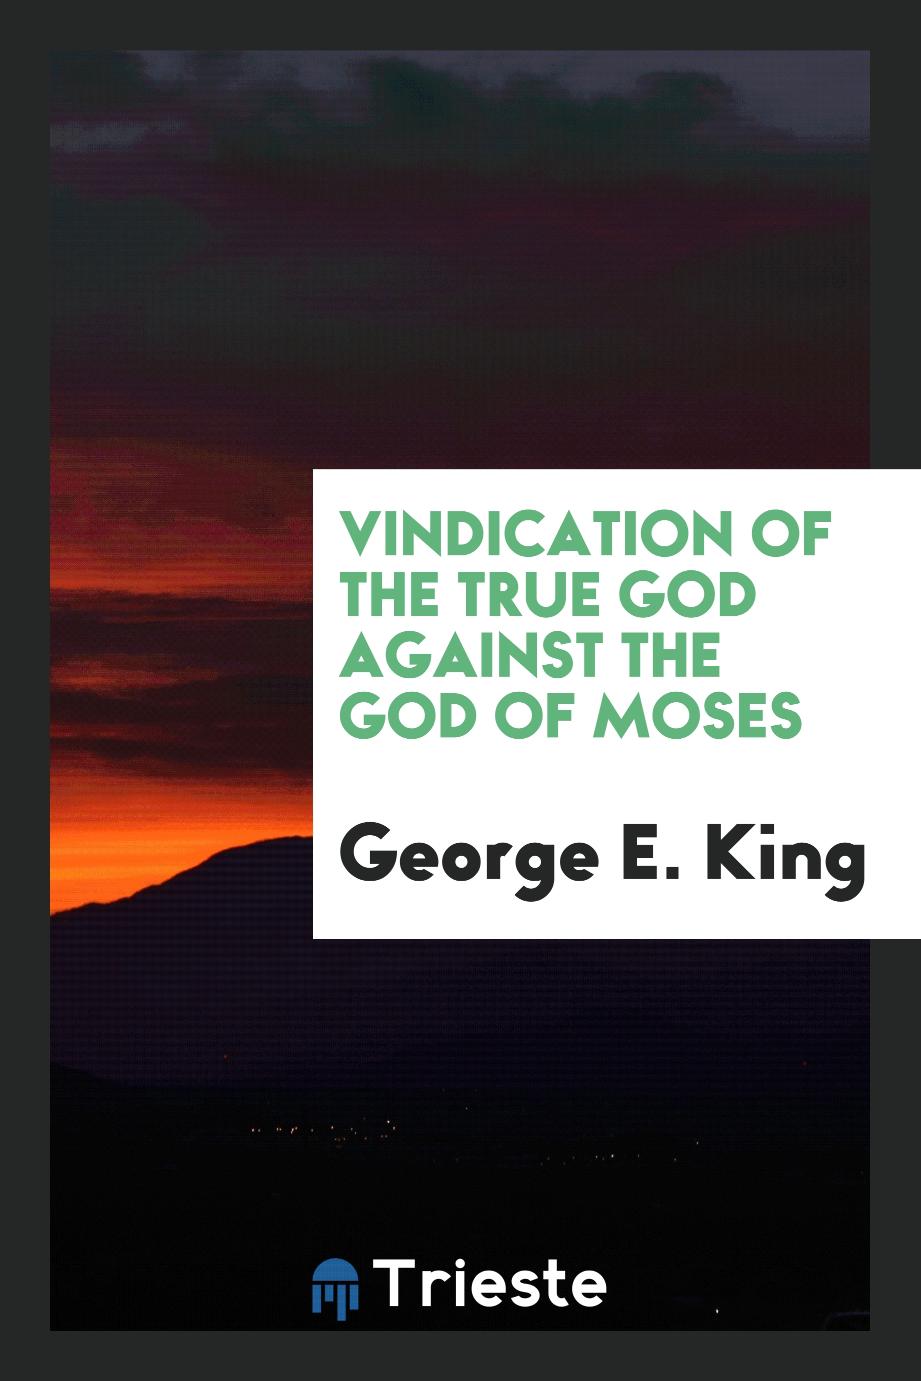 Vindication of the true God against the God of Moses